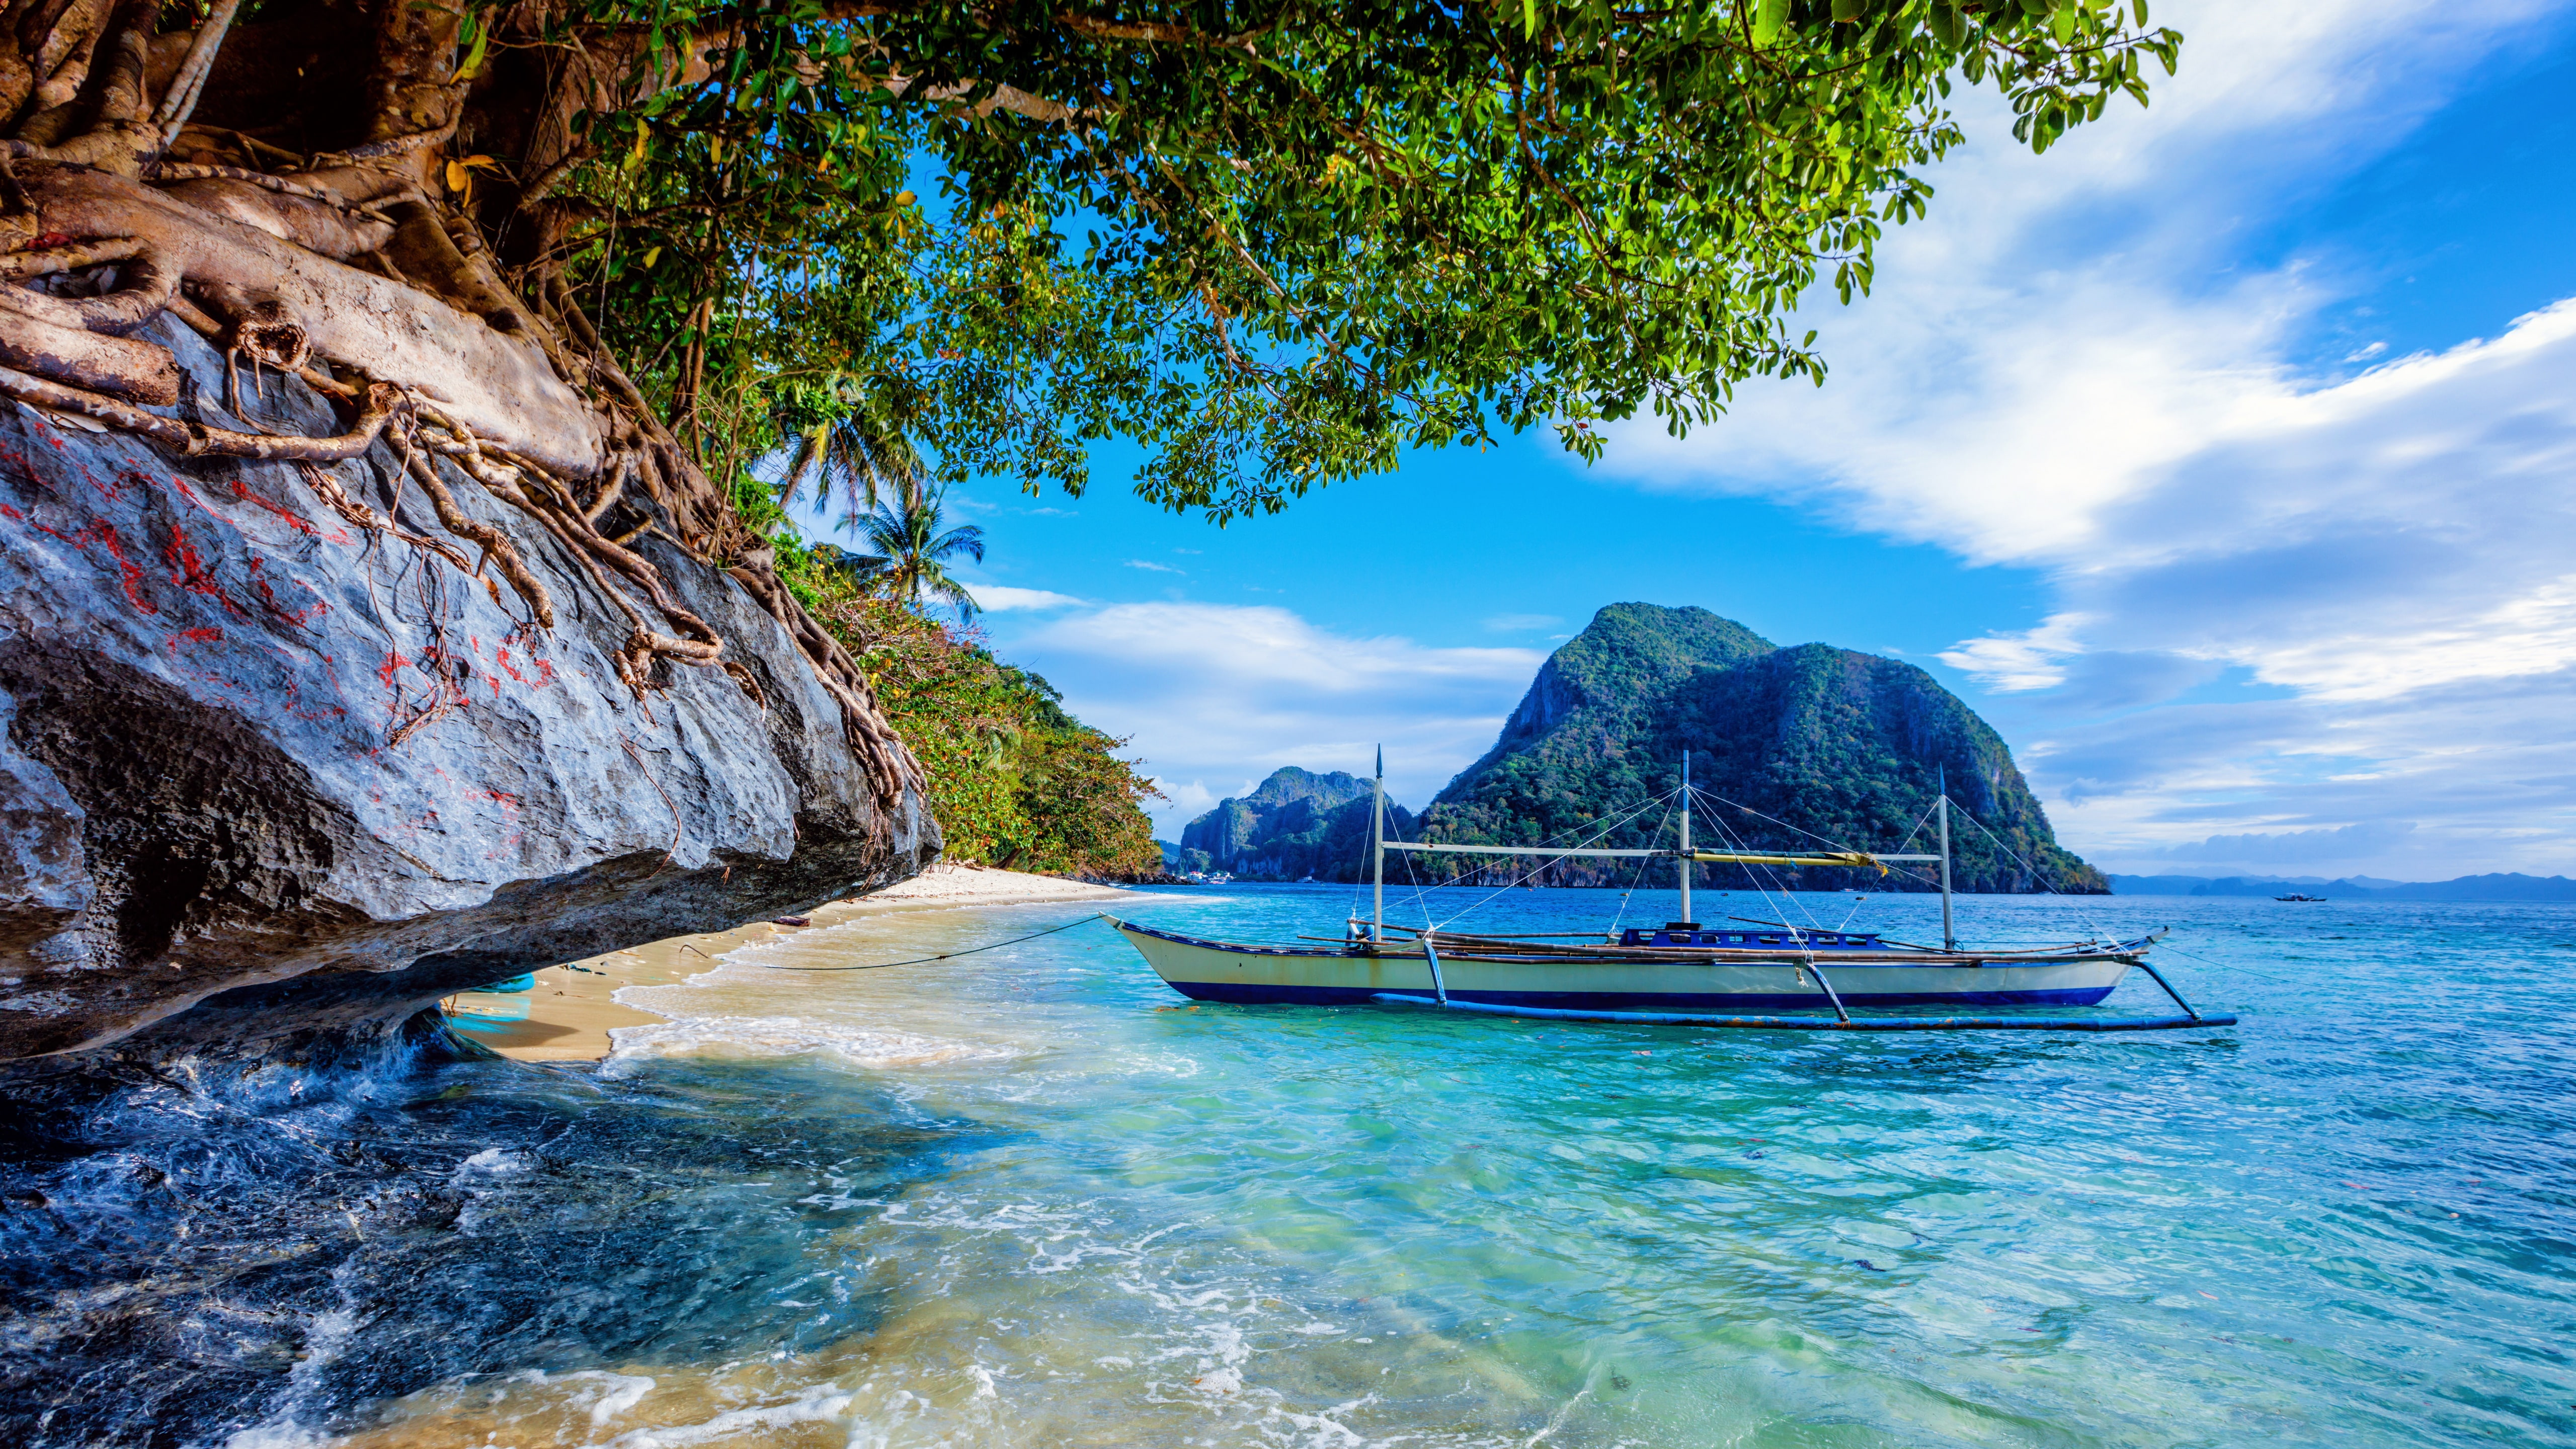 coast, turquoise water, beach, palawan, philippines, tropical